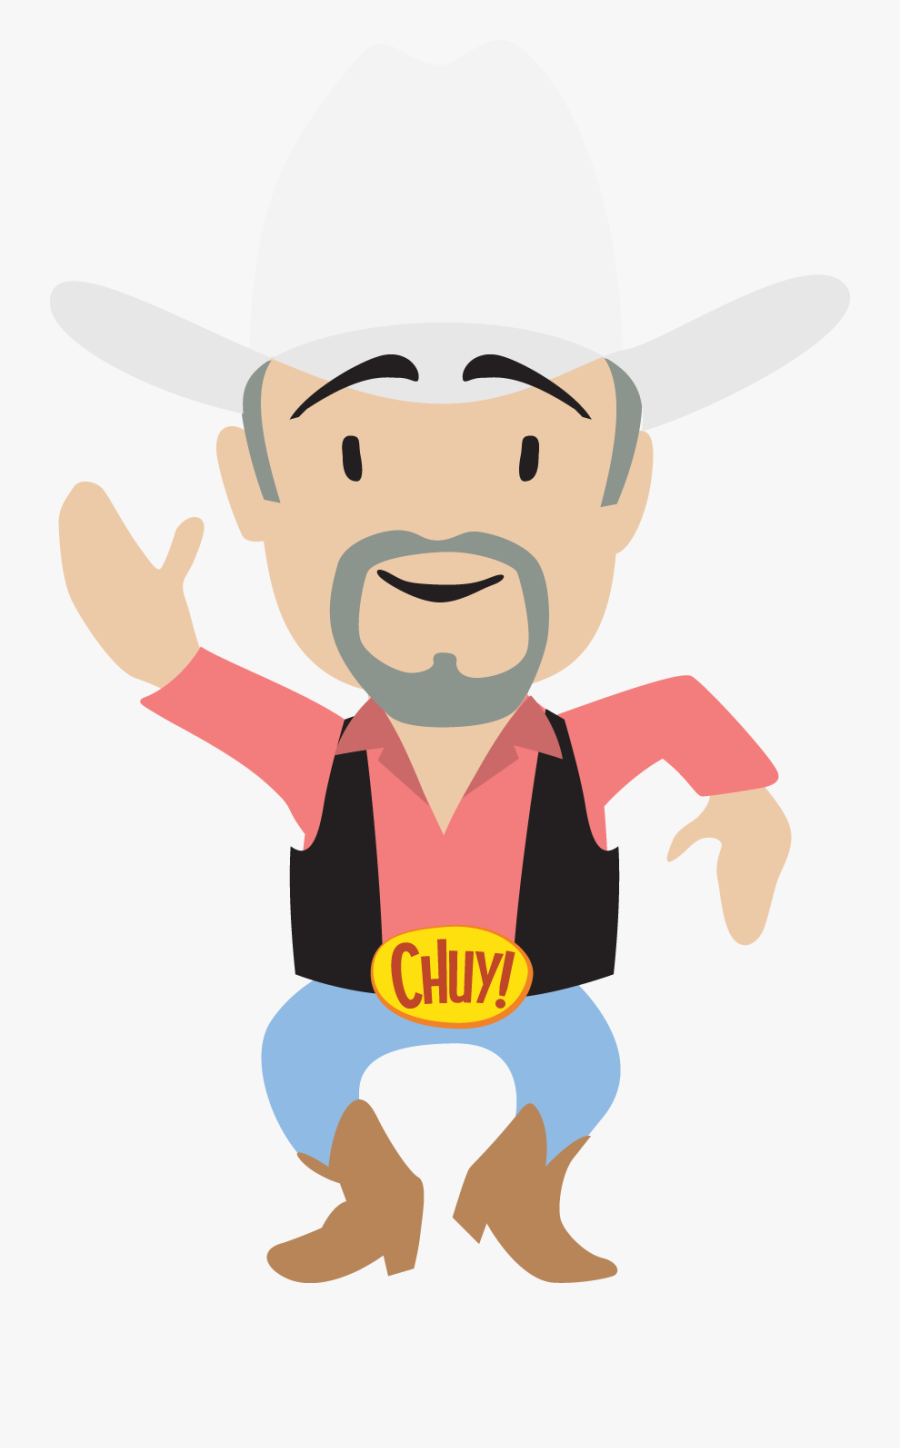 Chuy Salmon Shirt And White Hat - Shirt, Transparent Clipart